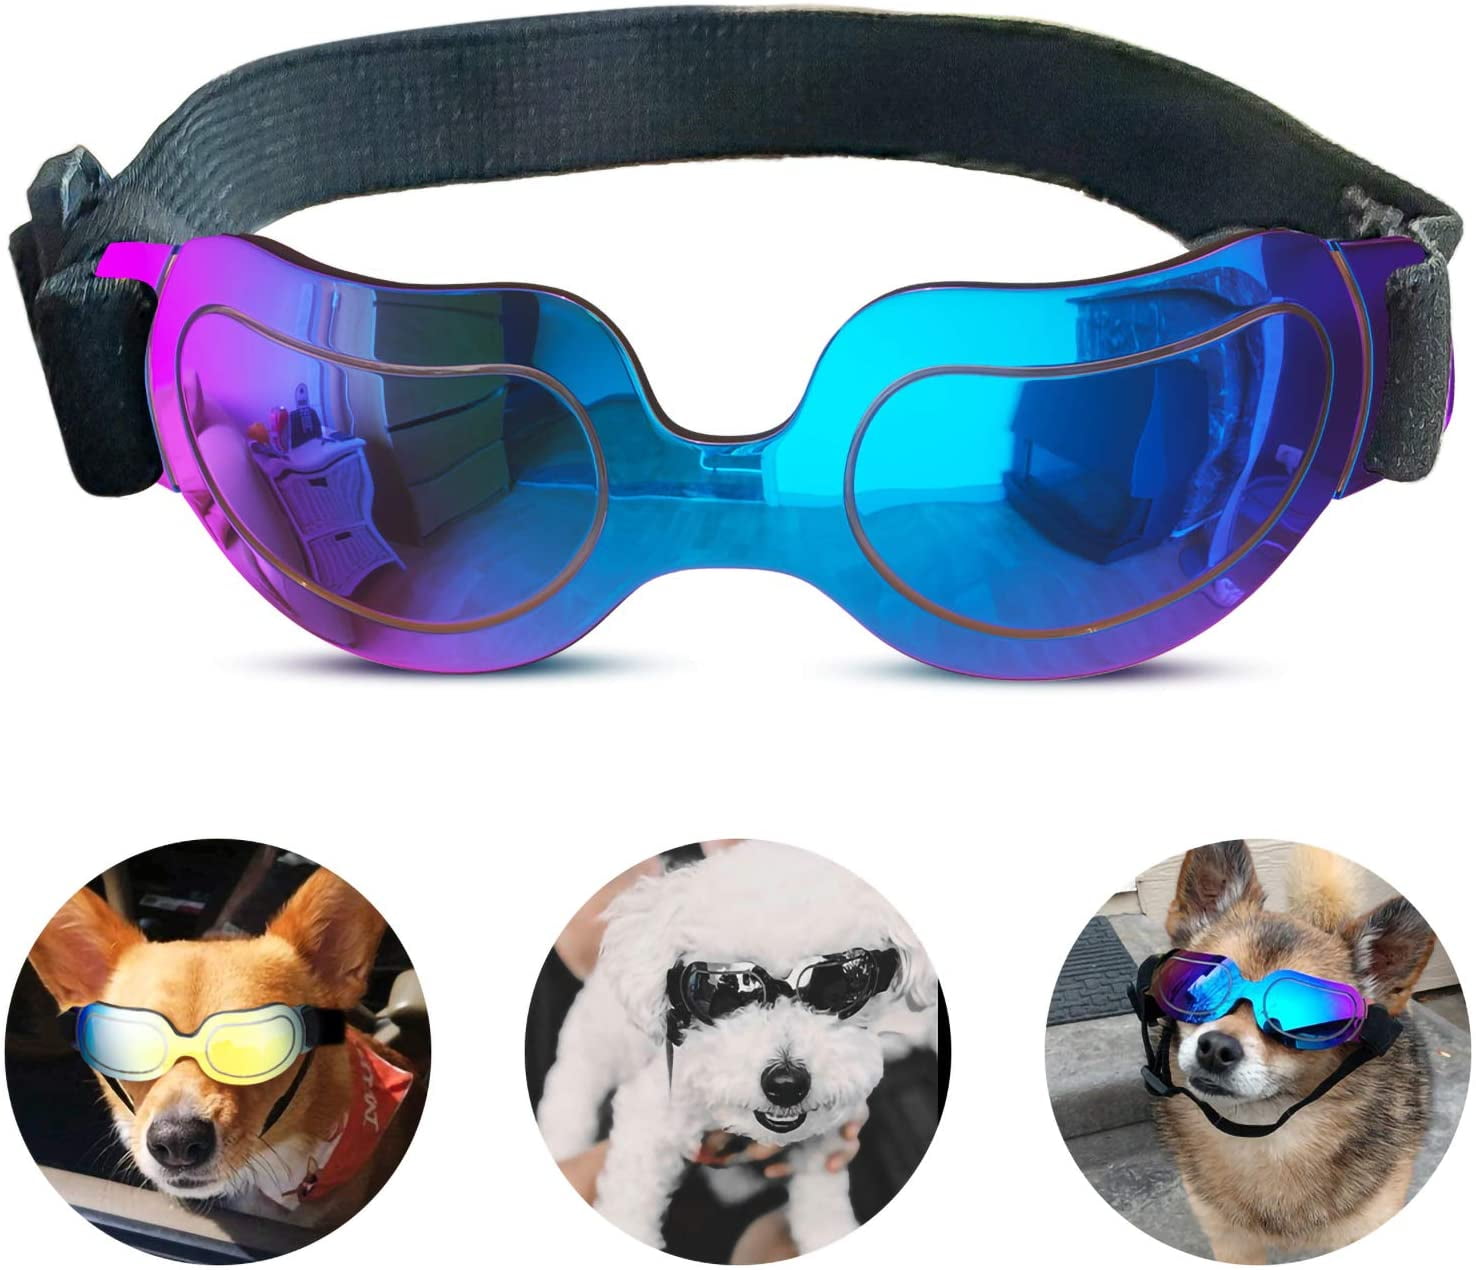 Lewondr Small Dog Sunglasses UV Protection Goggles Eye Wear Protection with Adjustable Strap Foldable Pet Sunglasses for Dogs Waterproof Pet Sun Glasses Dog Windproof Anti-Fog Glasses White 